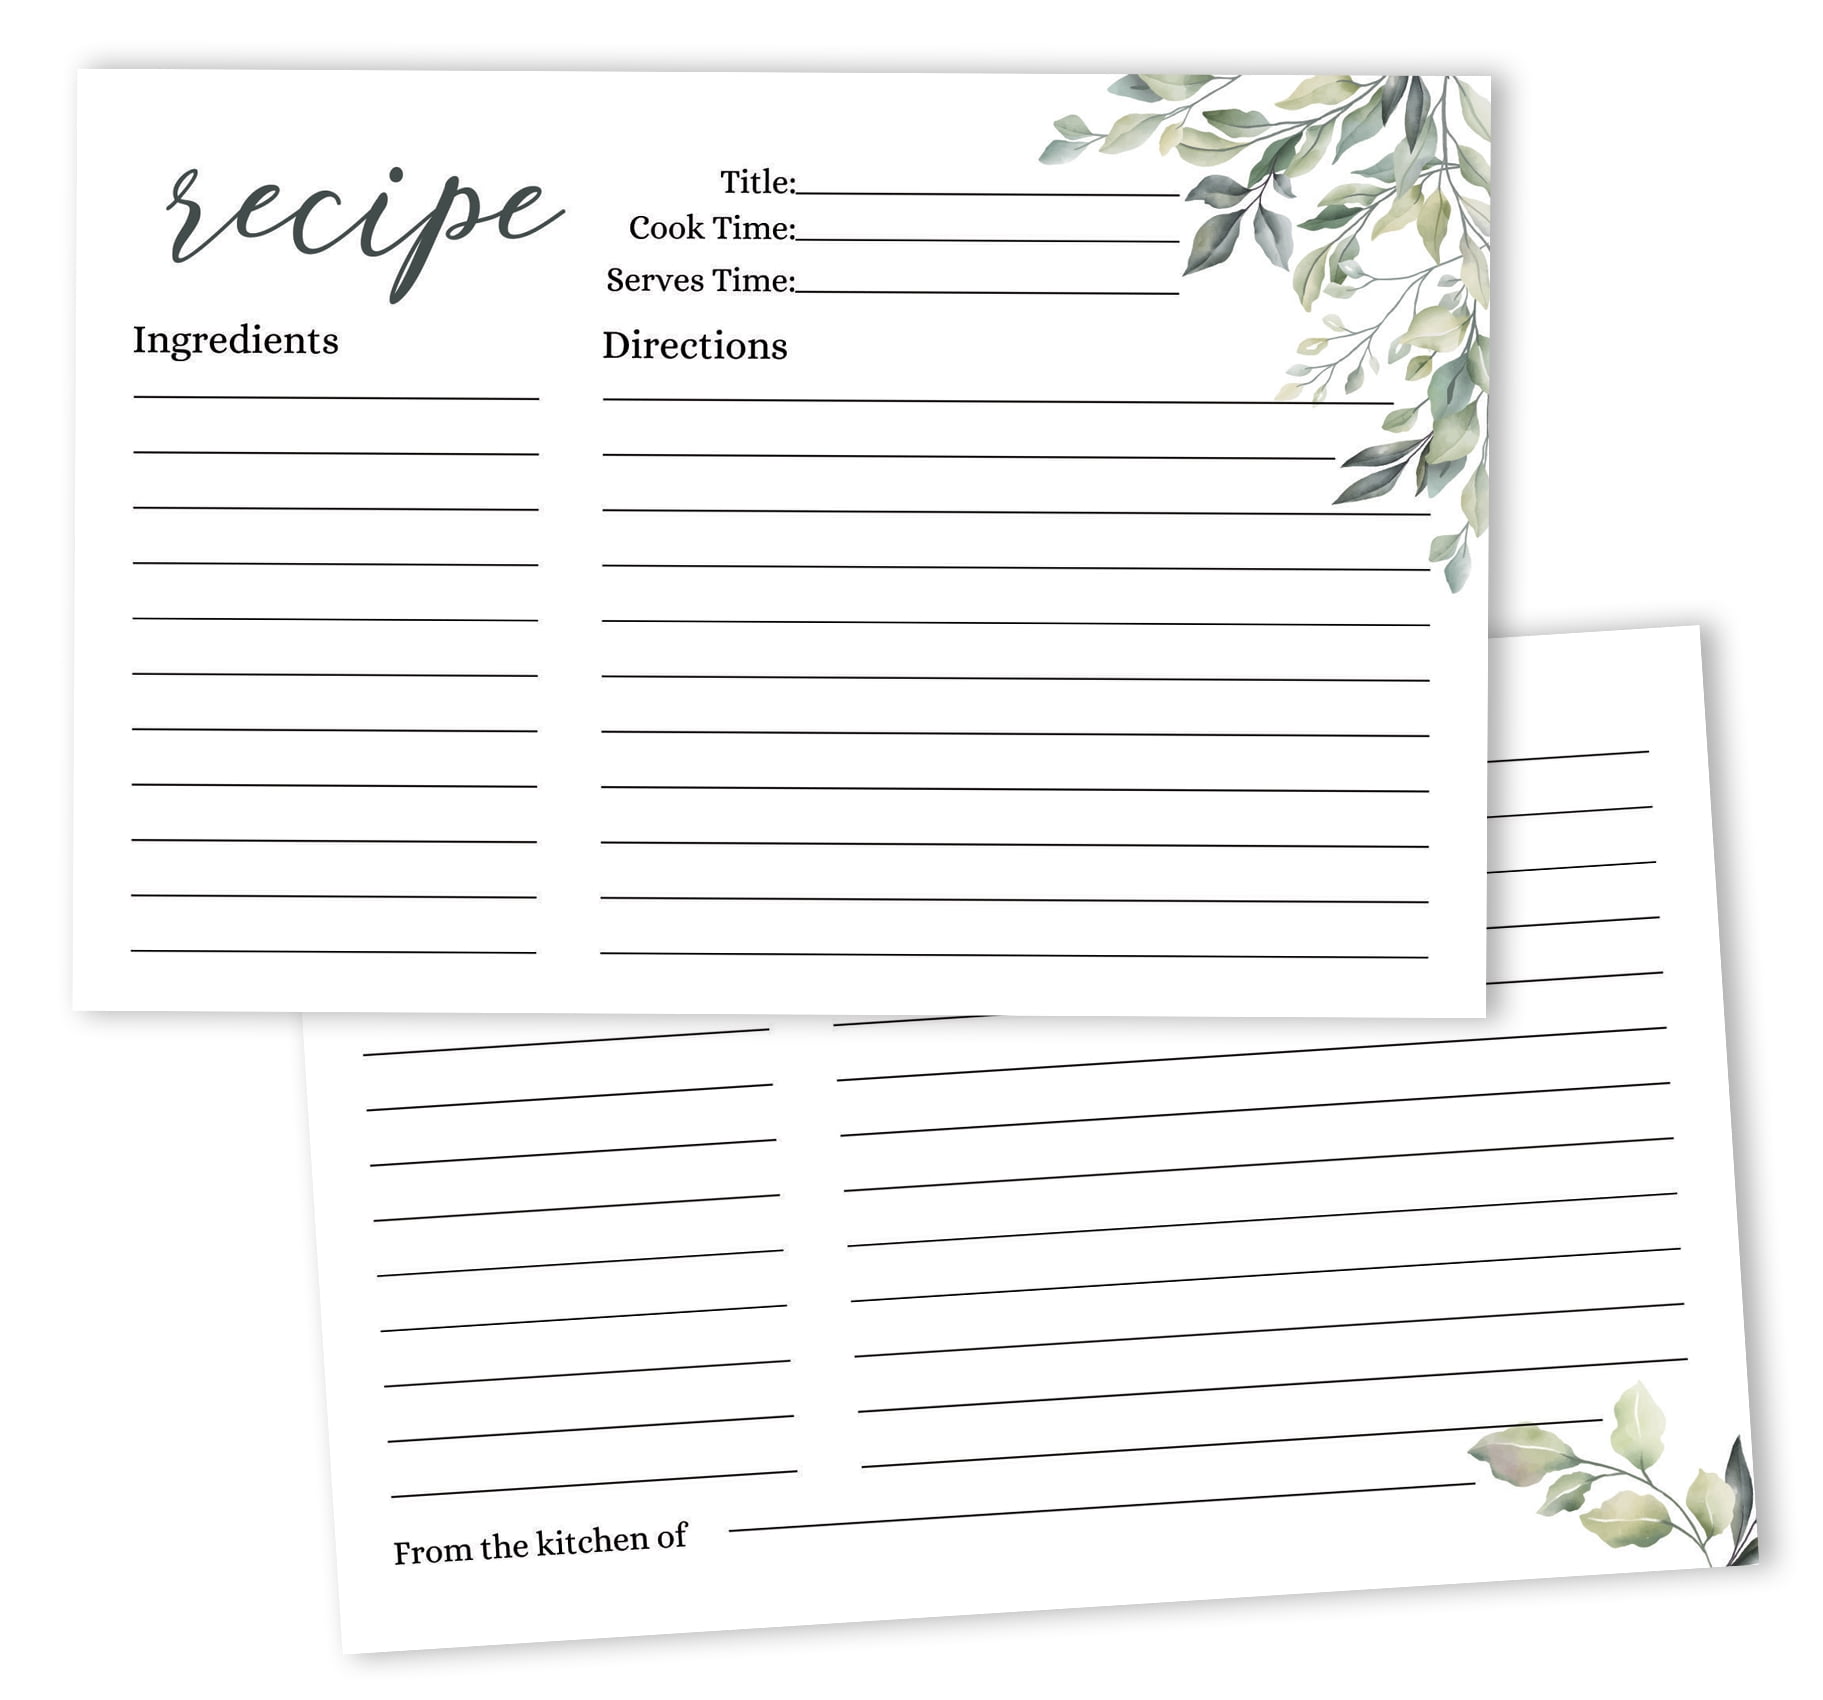 Outshine Premium Recipe Cards 4X6 Inches, Sunflower Design (Set Of 50) |  No-Smear Double Sided Thick Cardstock | Bulk Blank Recipe Cards For Recipe